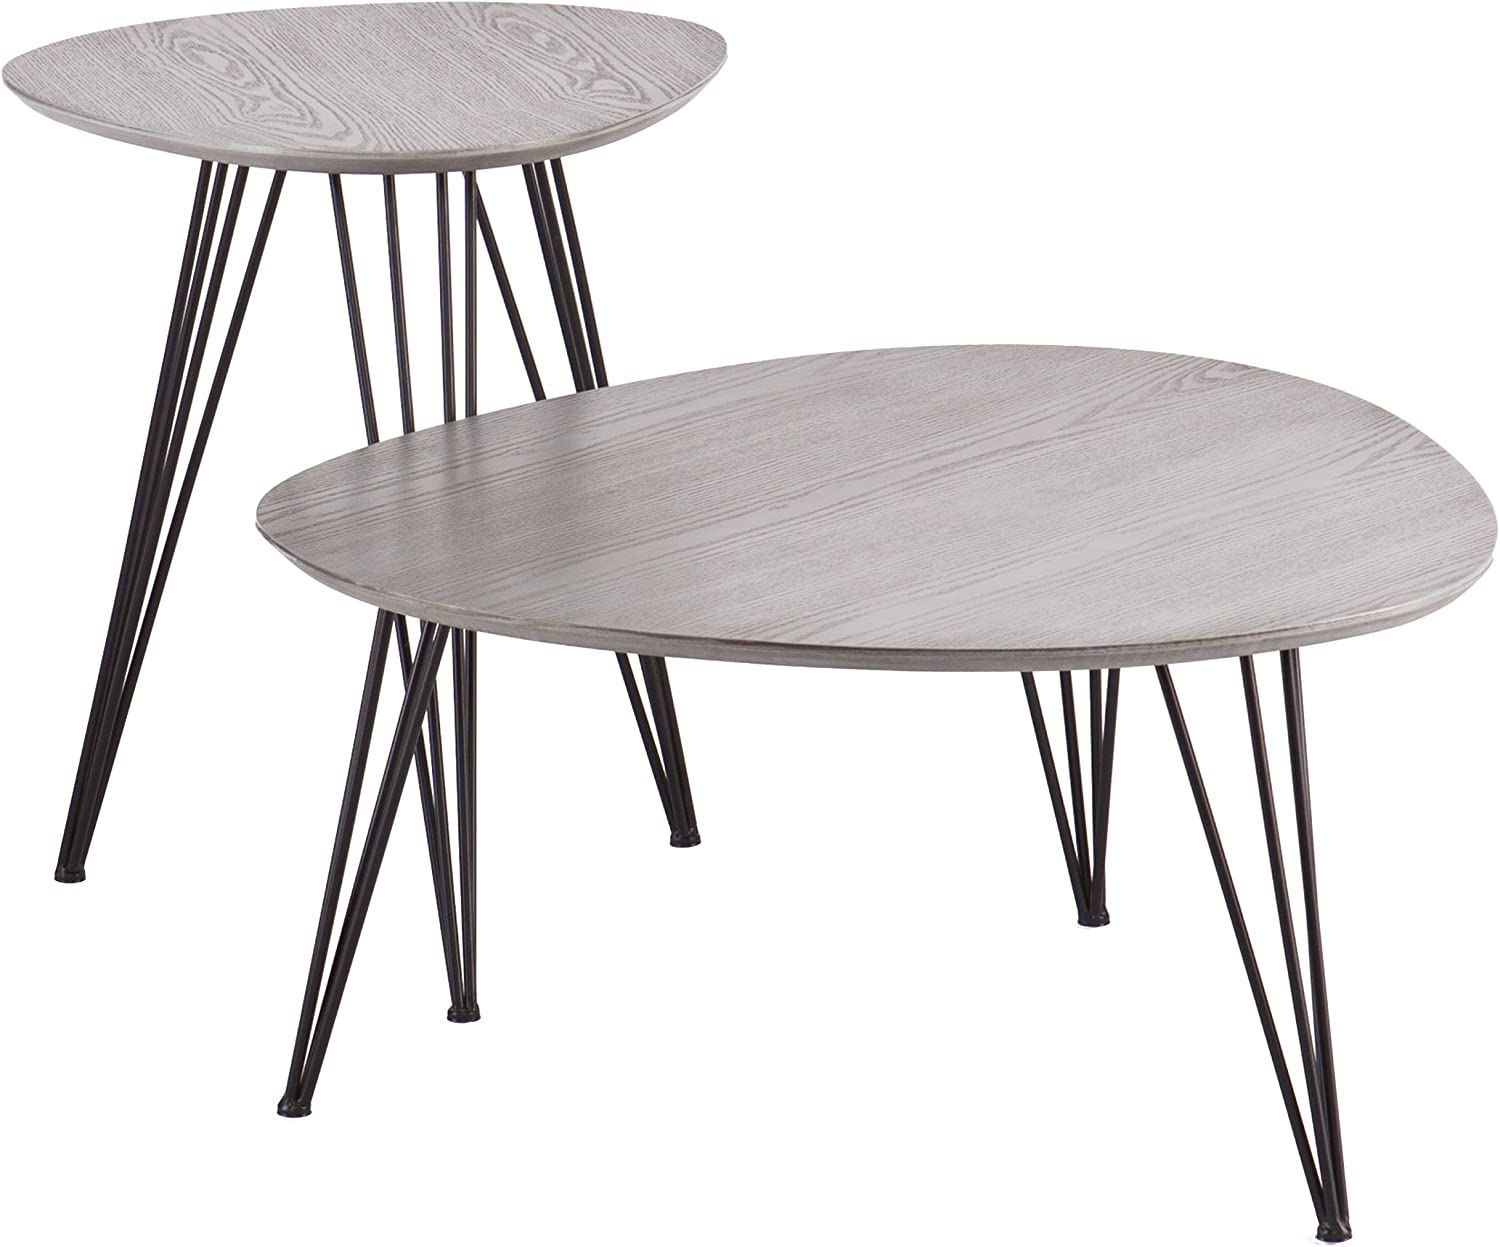 Bannock Coordinating Accent Tables - Set of 2 - Matte Gray Top w/ Black Metal Frame